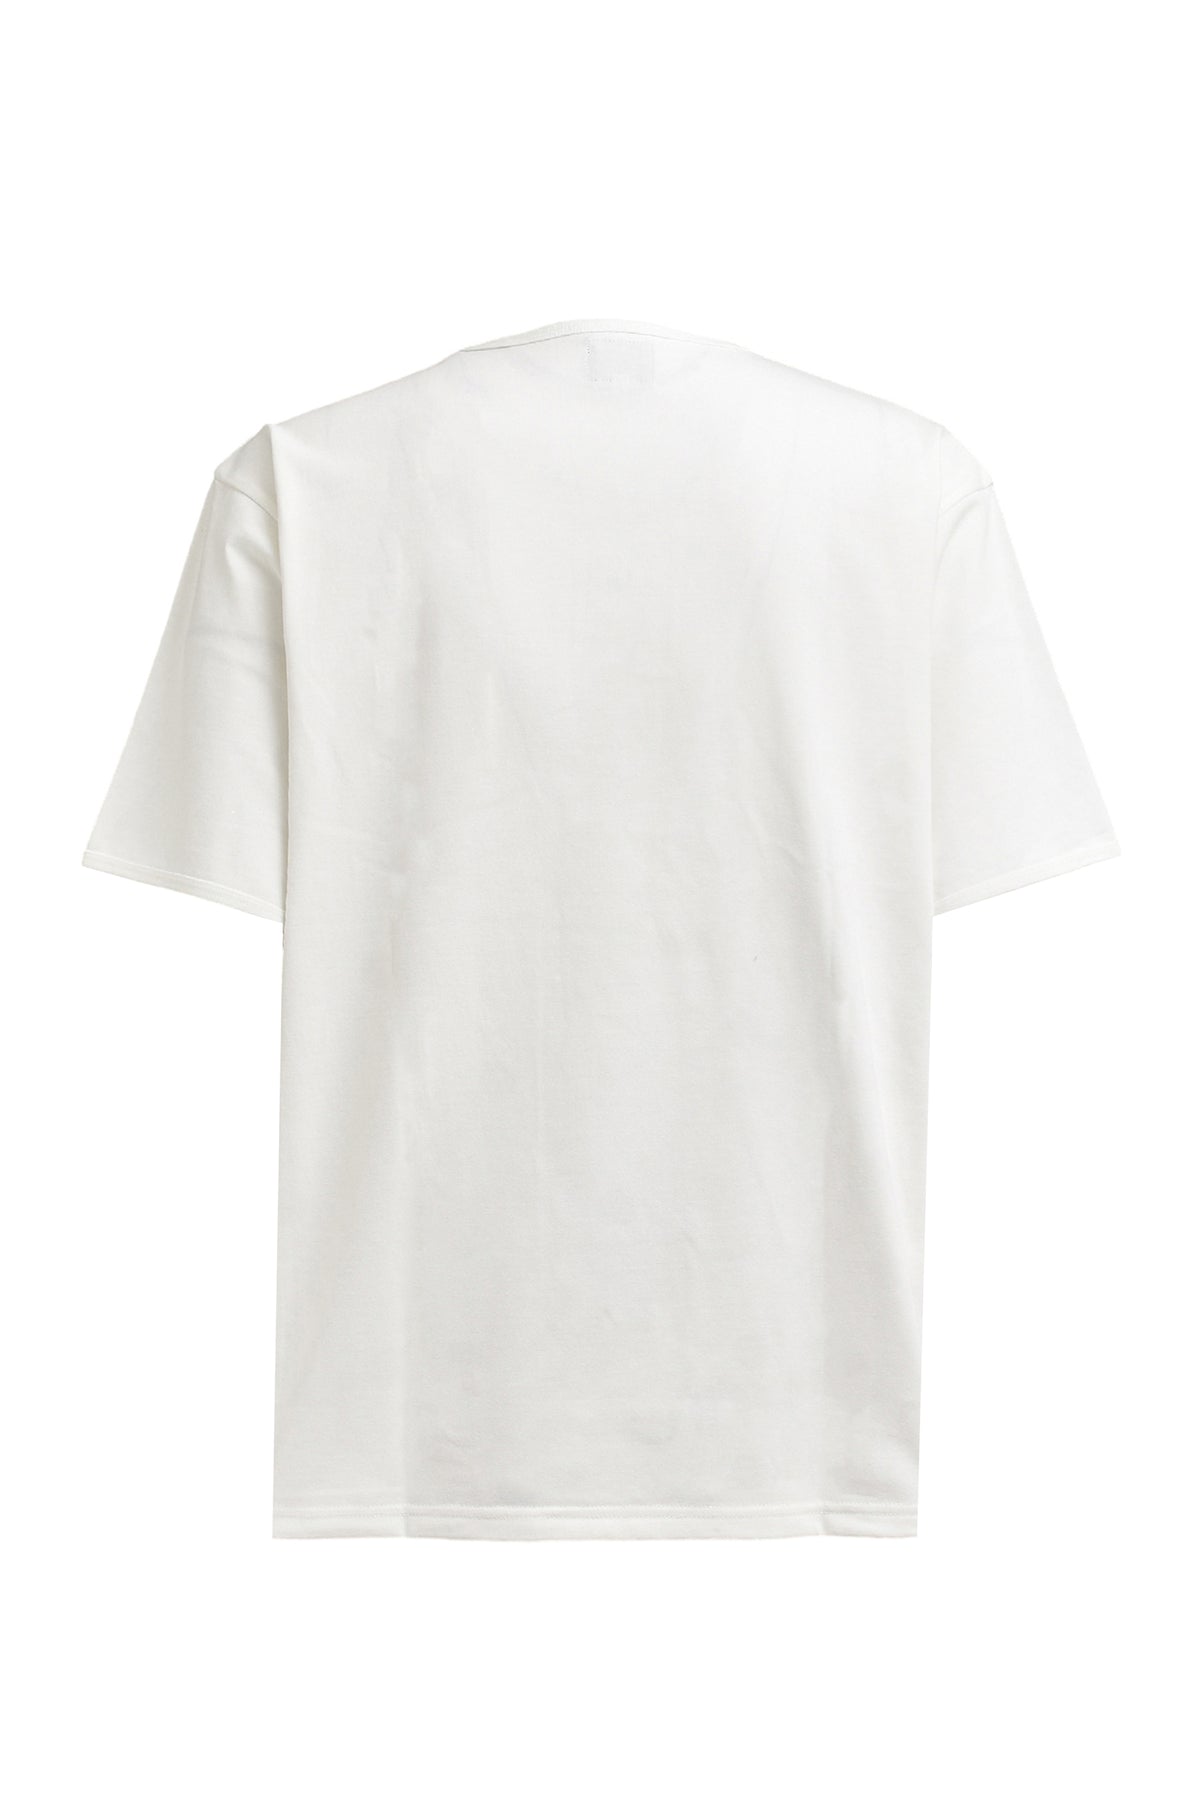 S/S HENLEY NECK TEE - POLY JERSEY / WHT